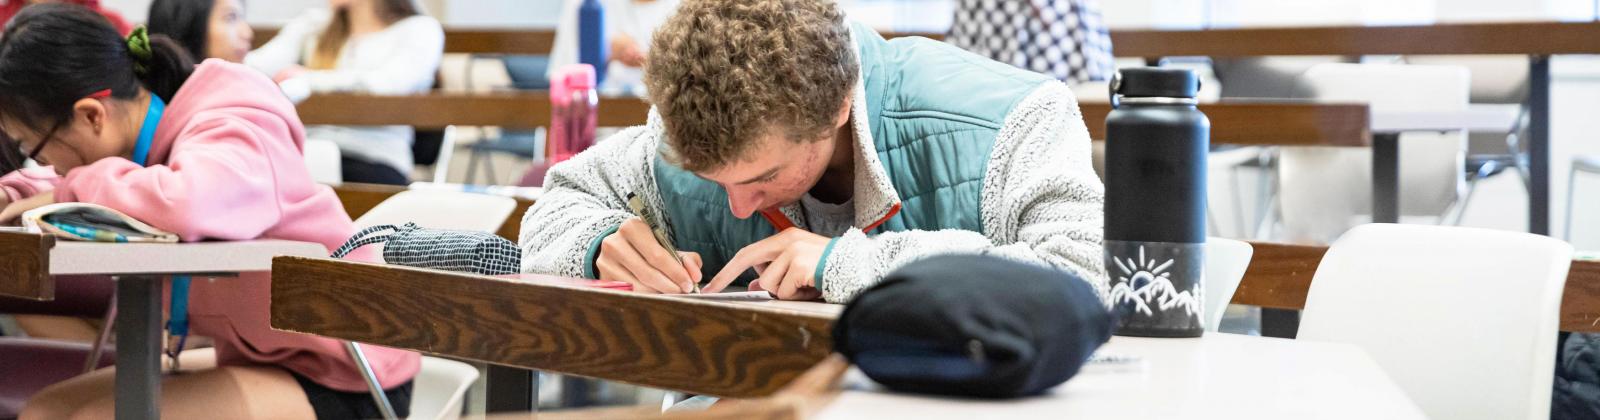 A student focused on writing an exam in a classroom